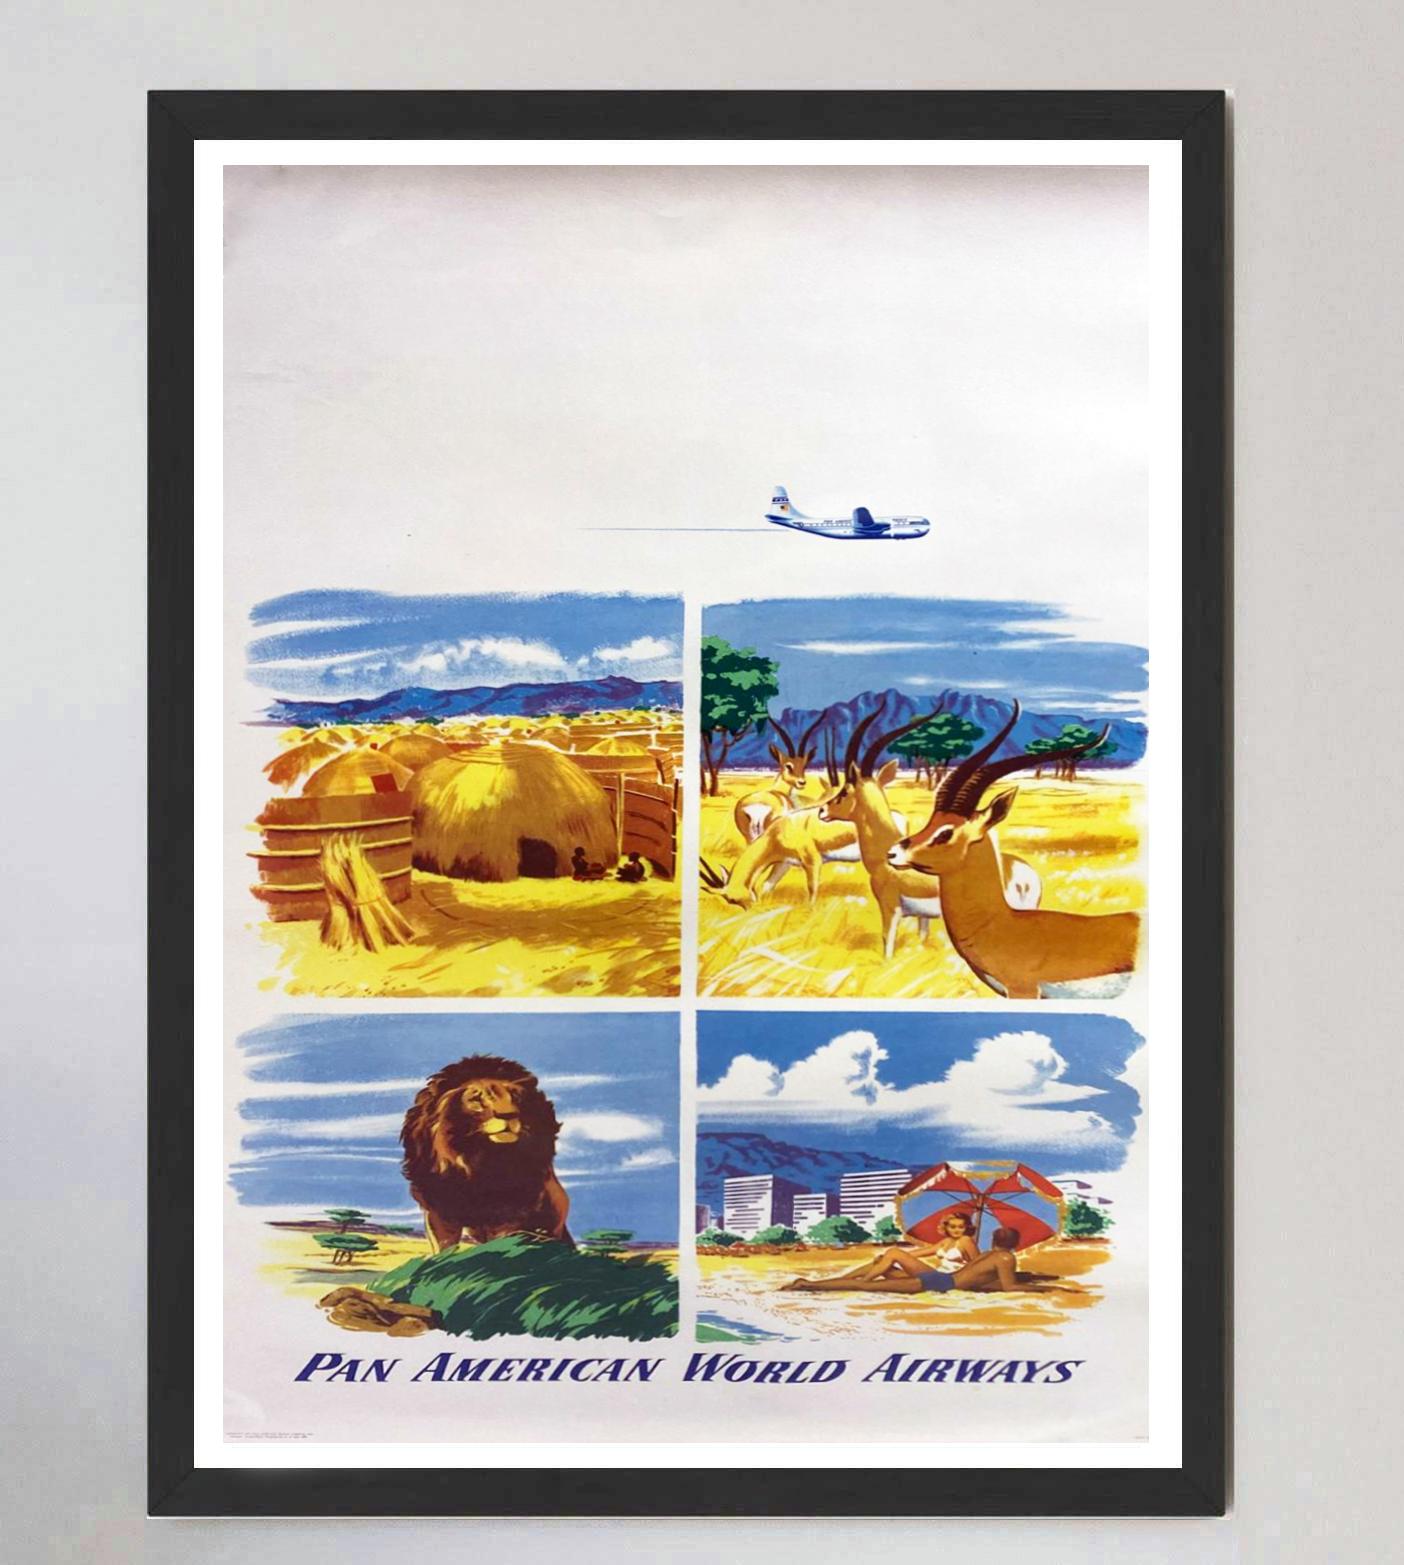 Wonderful & rare poster created in 1951 for Pan American World Airways, widely known as Pan Am. Depicting four gorgeous scenes featuring wildlife on a nature reserve, a local village and a beach resort, this poster showcases the best you can get